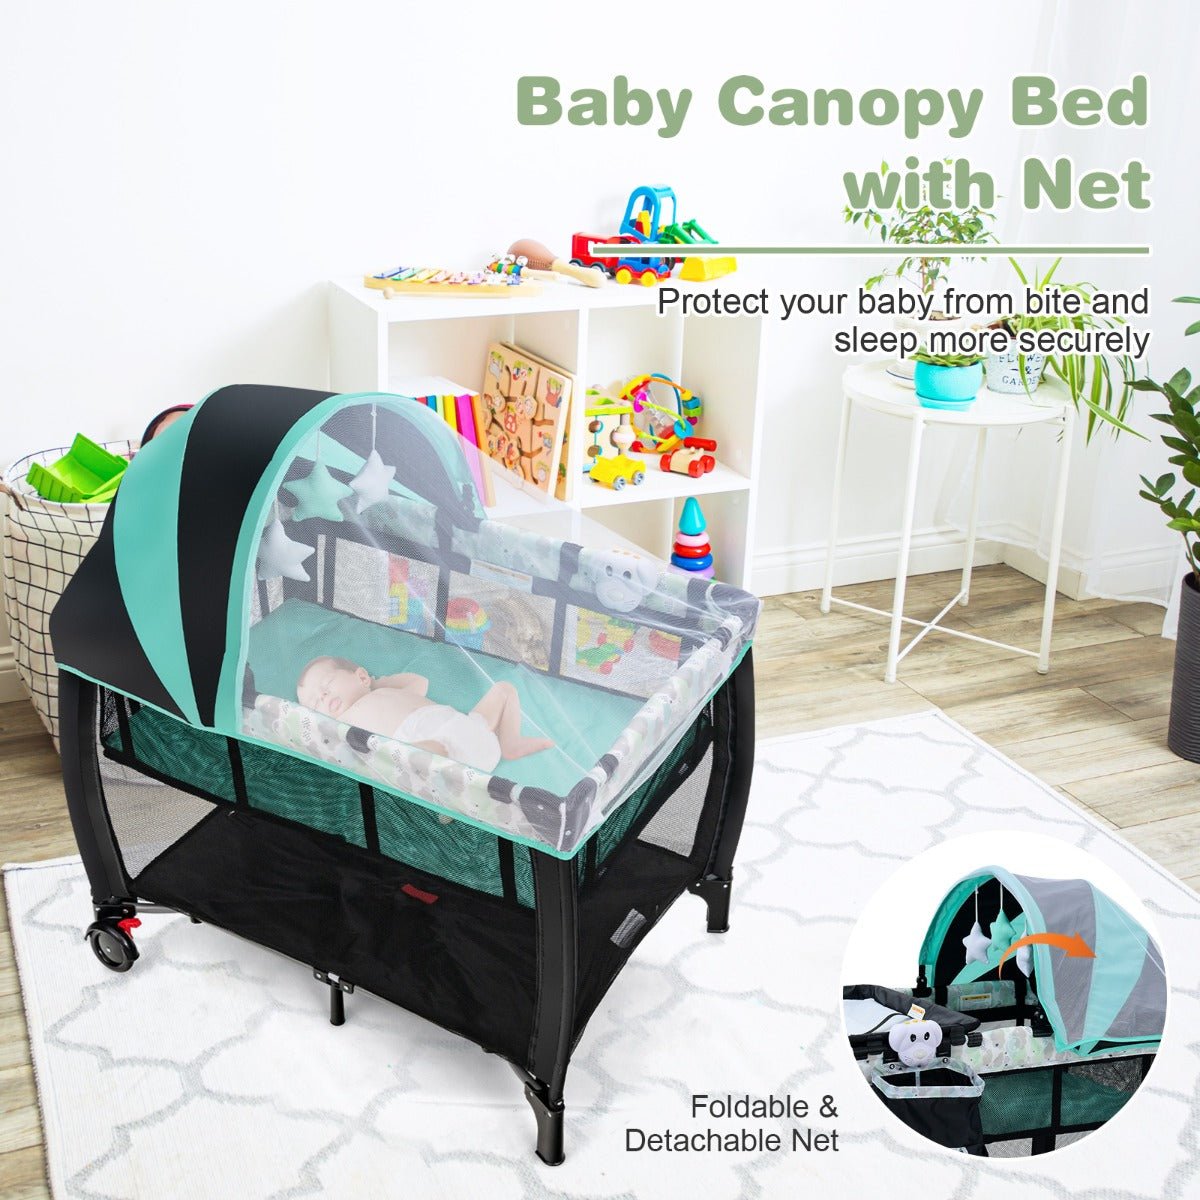 3-in-1 Baby Portacot with Adjustable Net - Secure Slumber and Adaptation